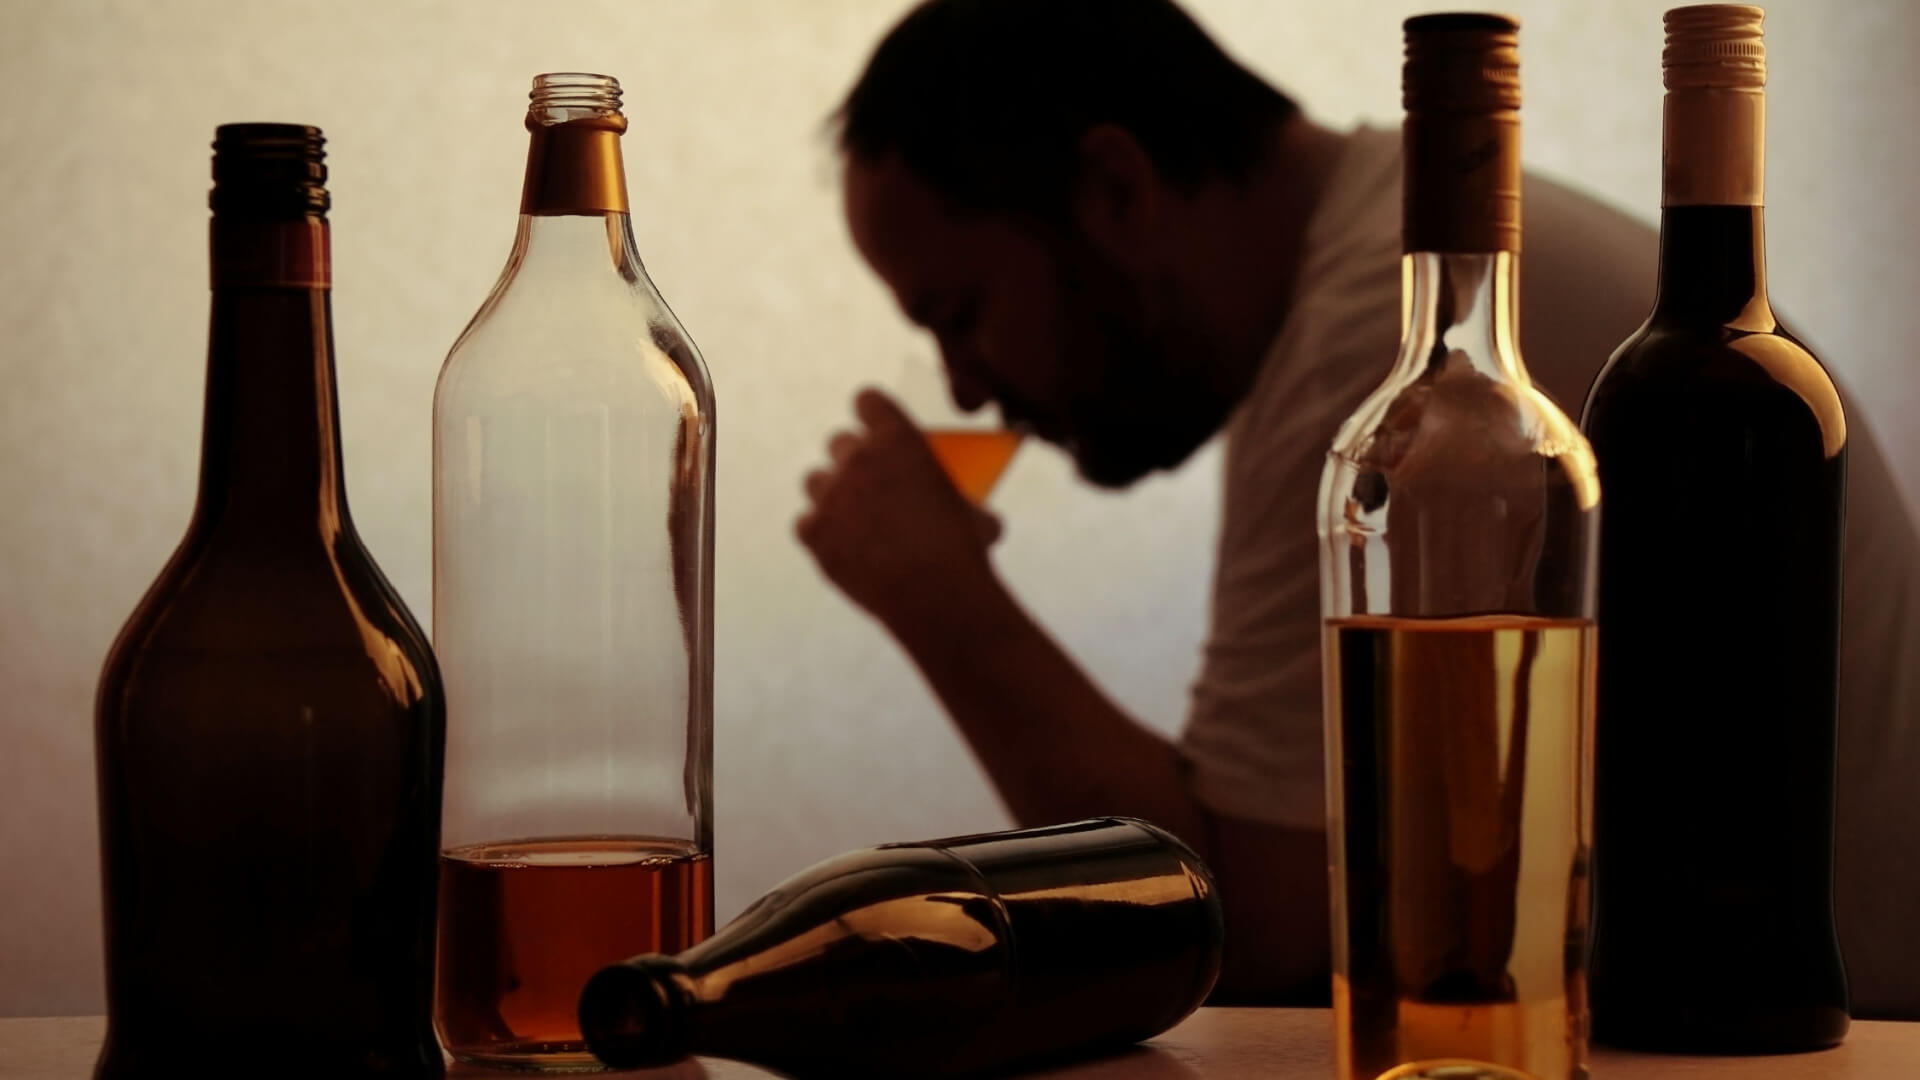 visible intoxication of a man drinking alone